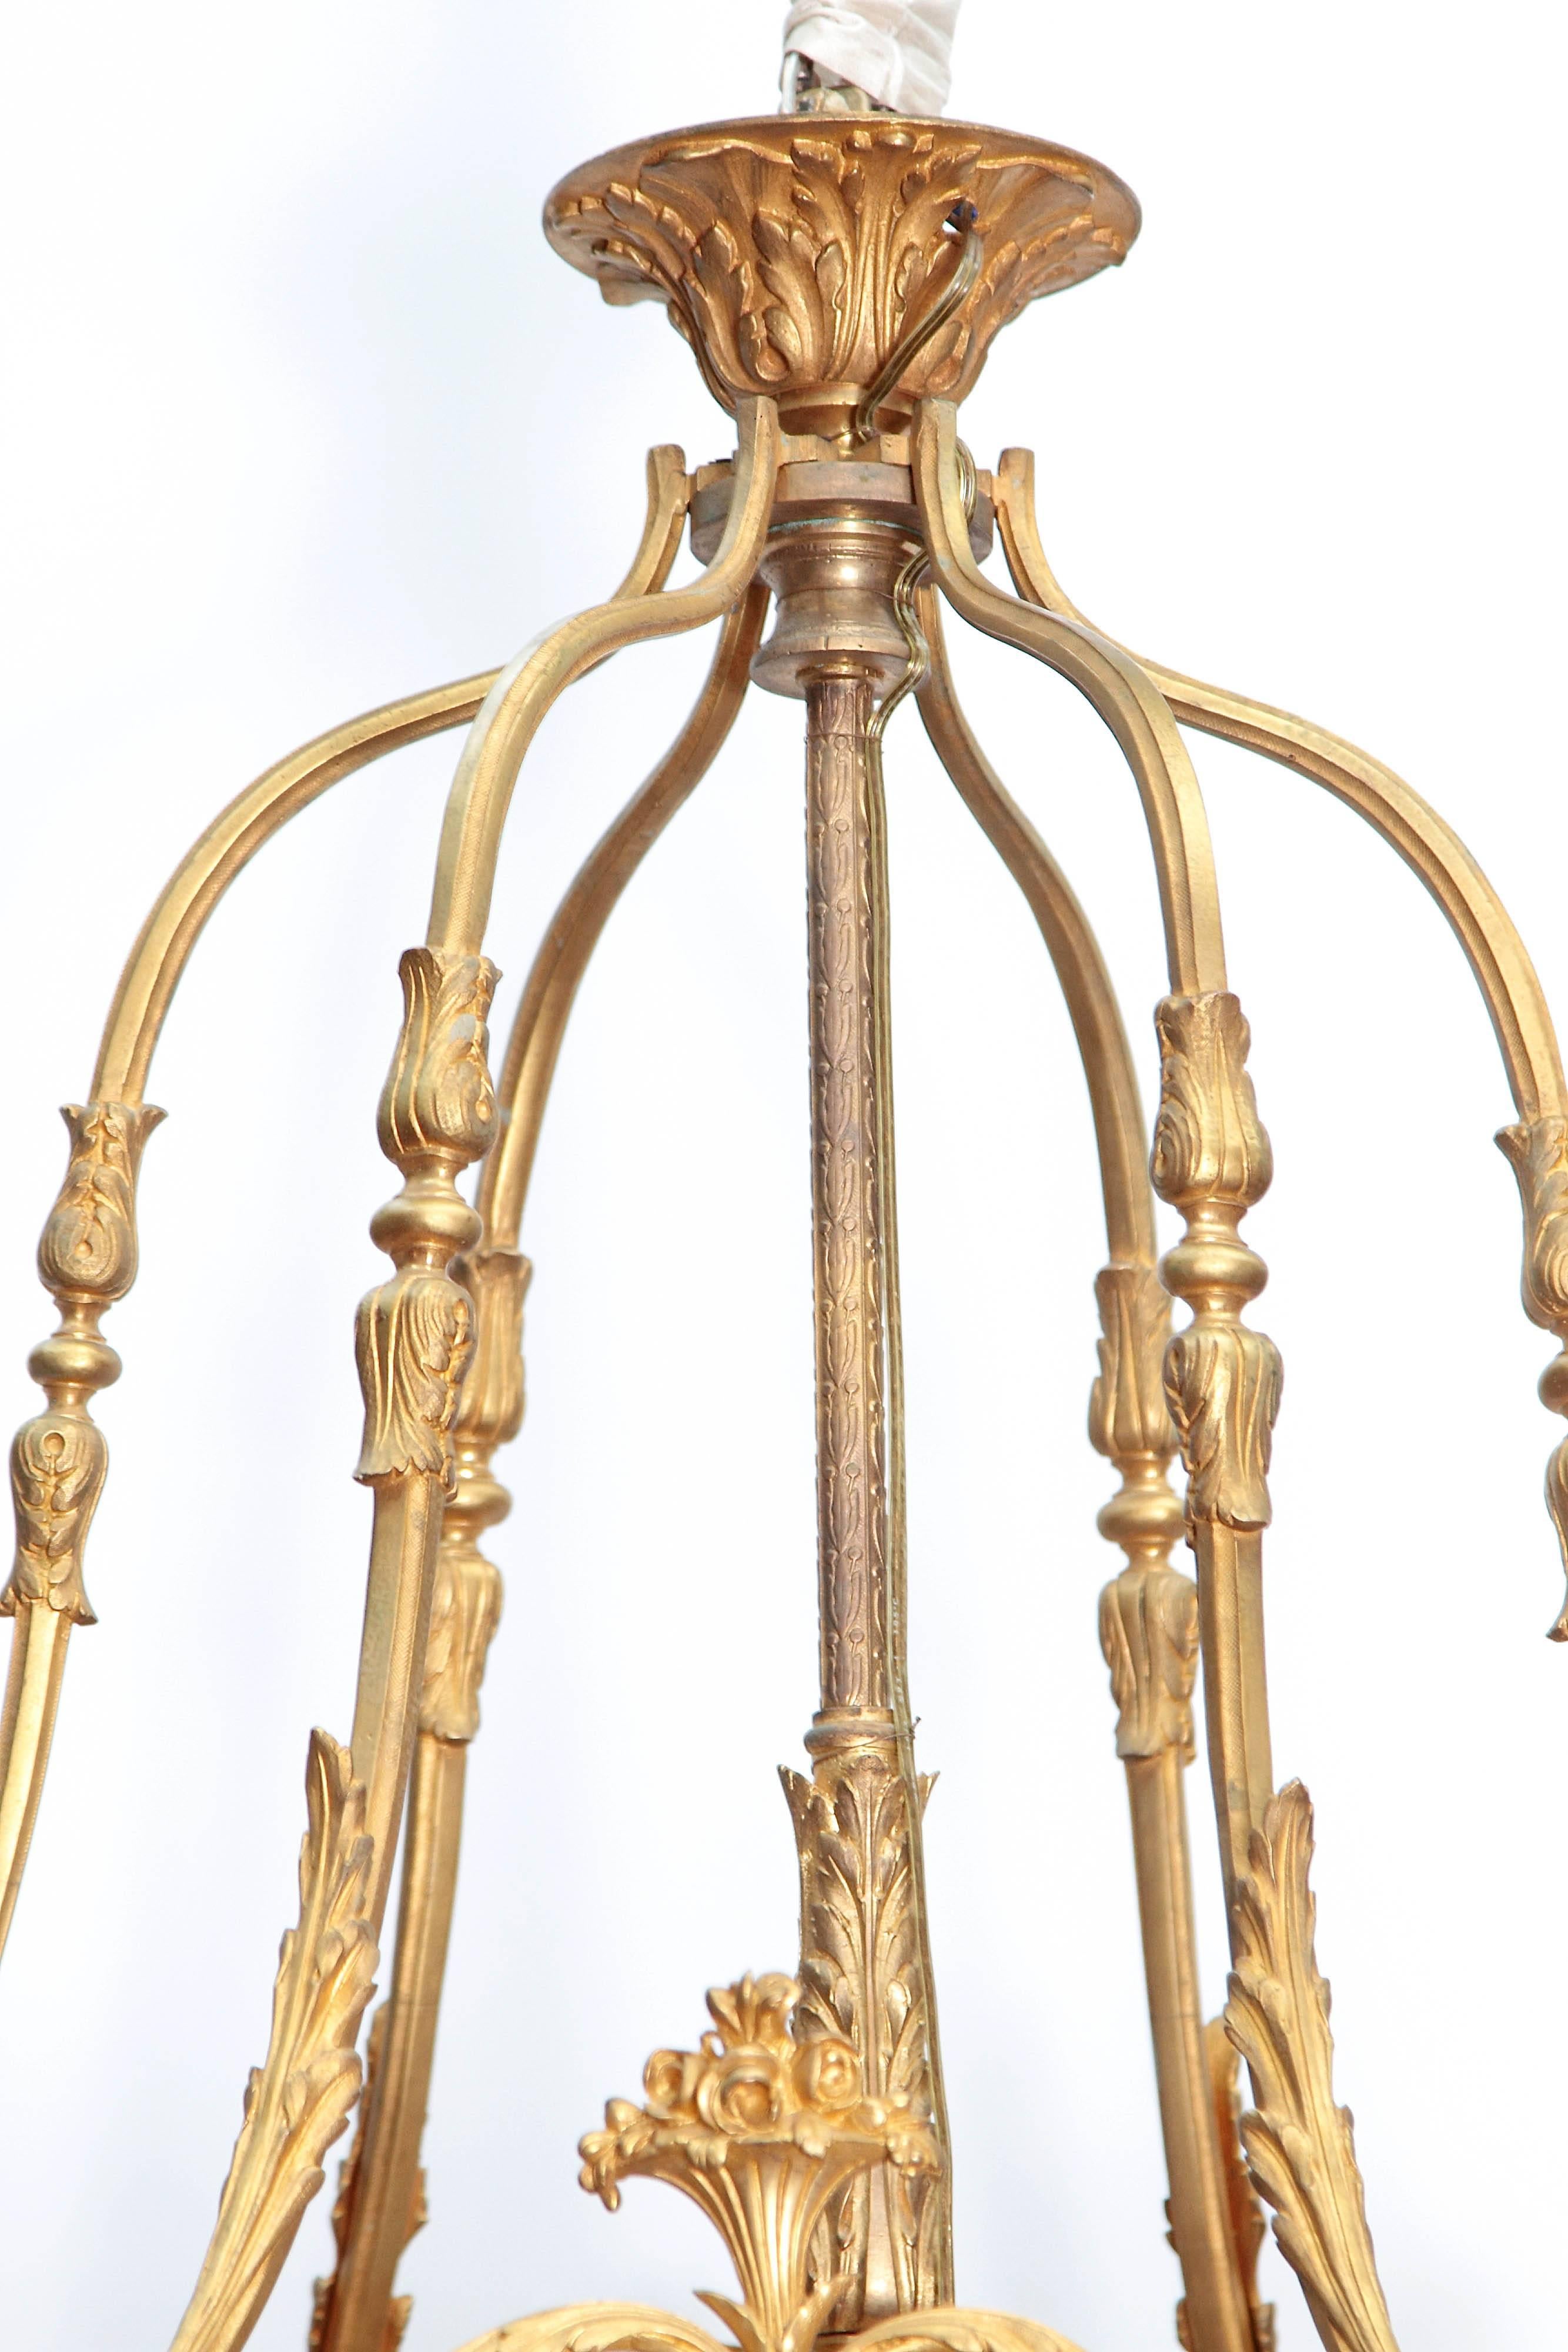 A large Louis XVI style six-light gilded bronze lantern, originally fitted for gas. Exceptional chaste castings and fine mercury gilding, the lantern composed of gentle S-curved upper and lower section supports with acanthus leaf scrolls. The body